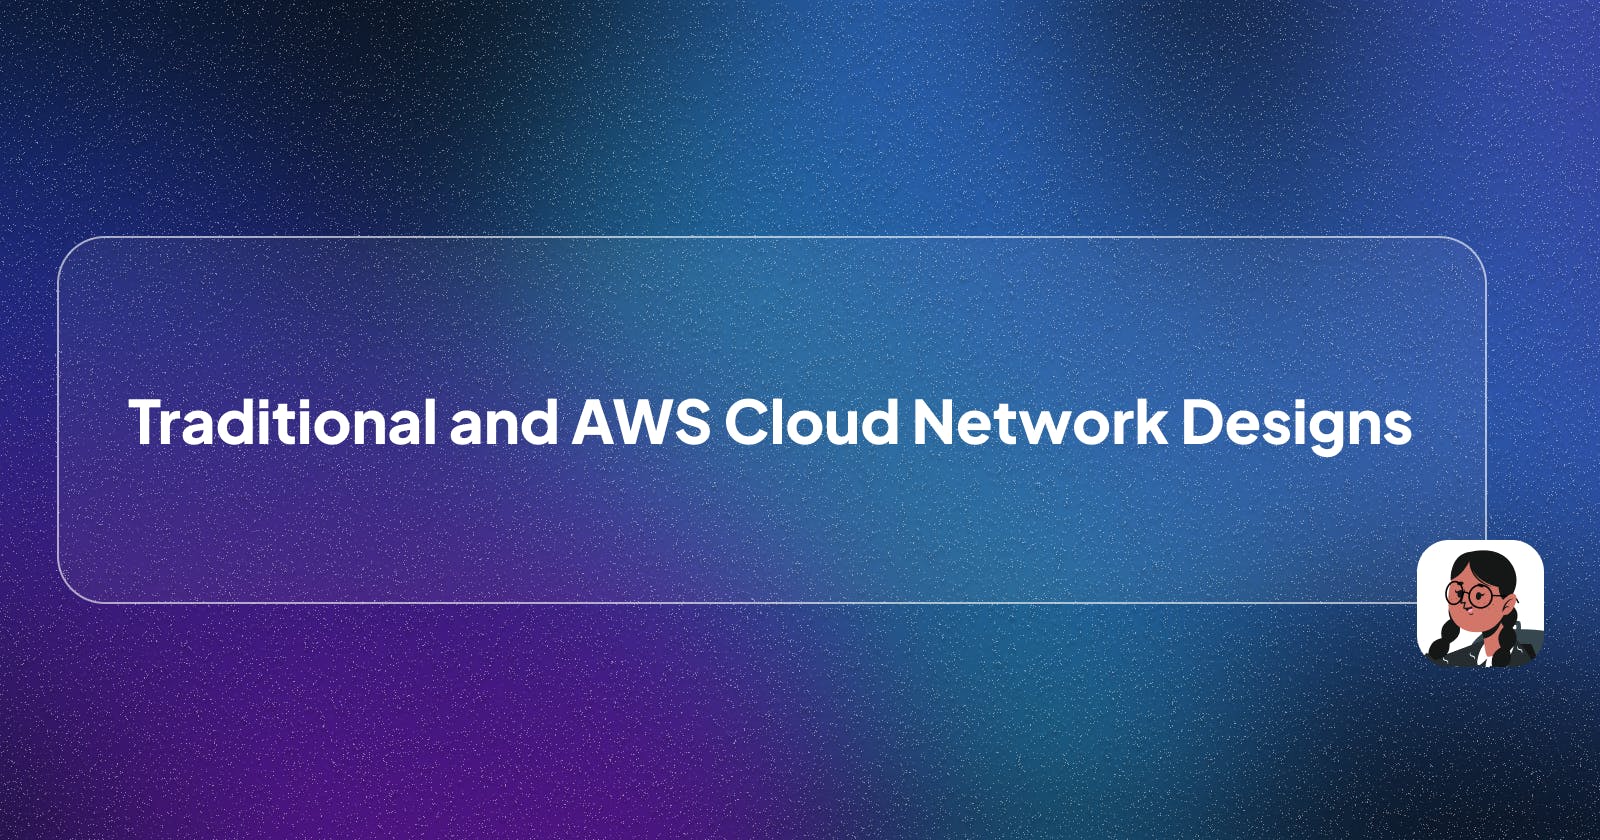 Exploring Traditional and AWS Cloud (2-Tier and 3-Tier) Network Designs